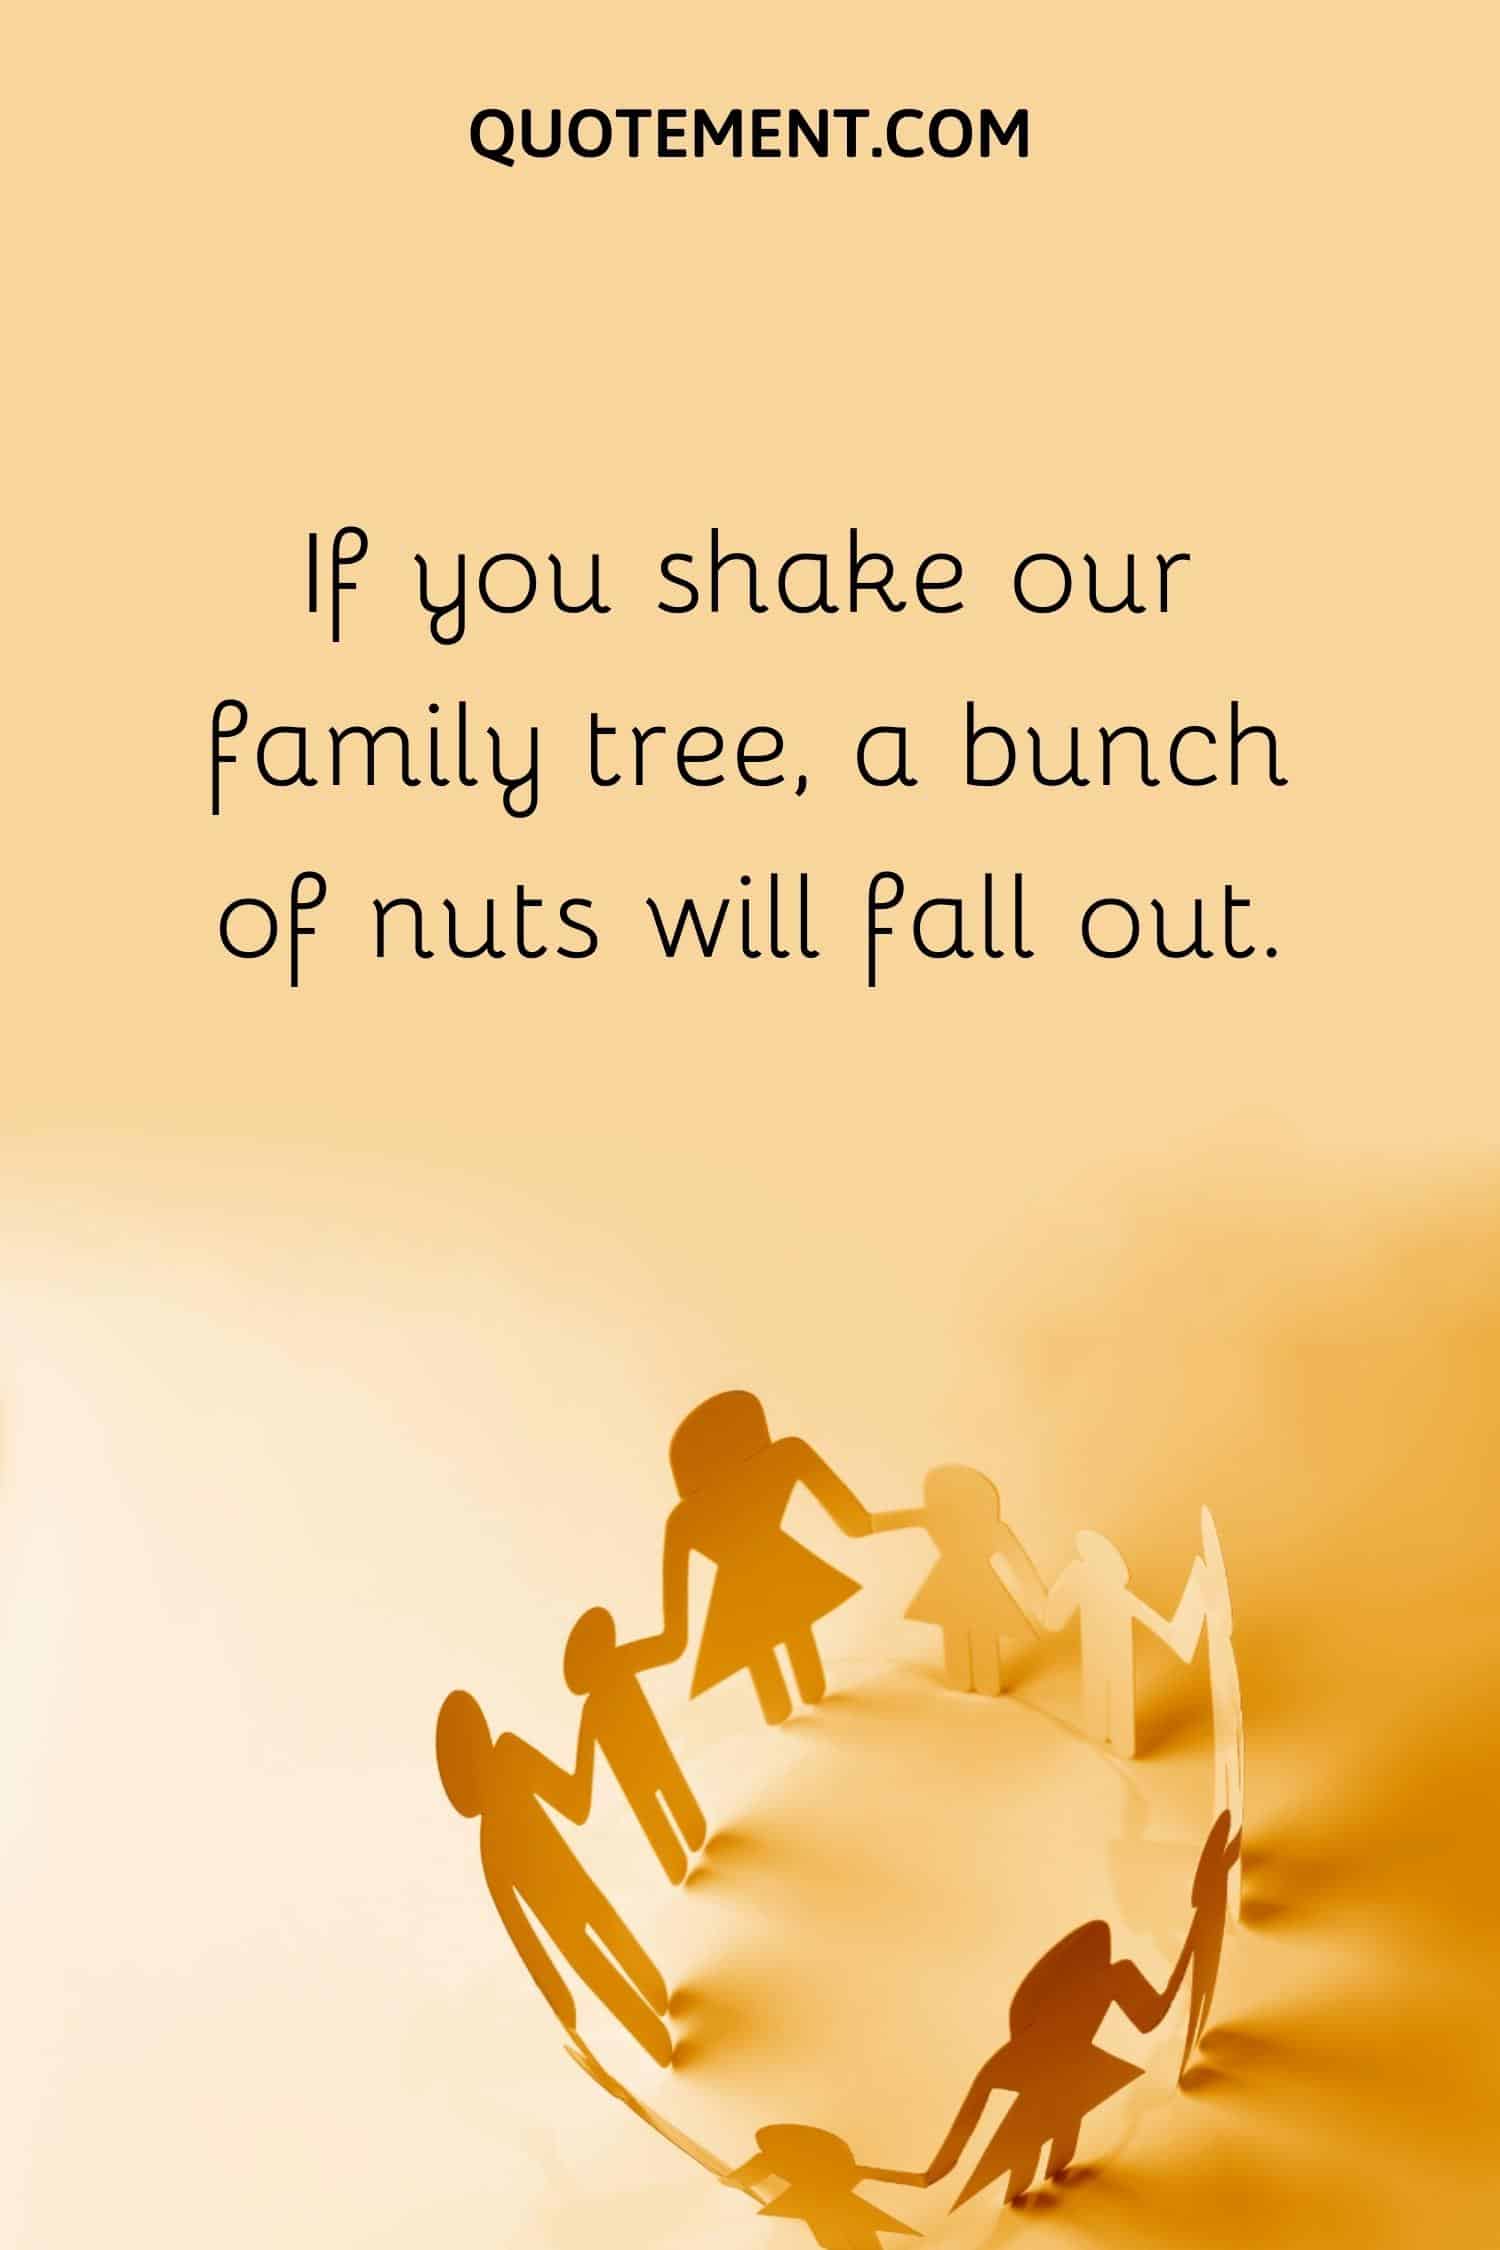 If you shake our family tree, a bunch of nuts will fall out